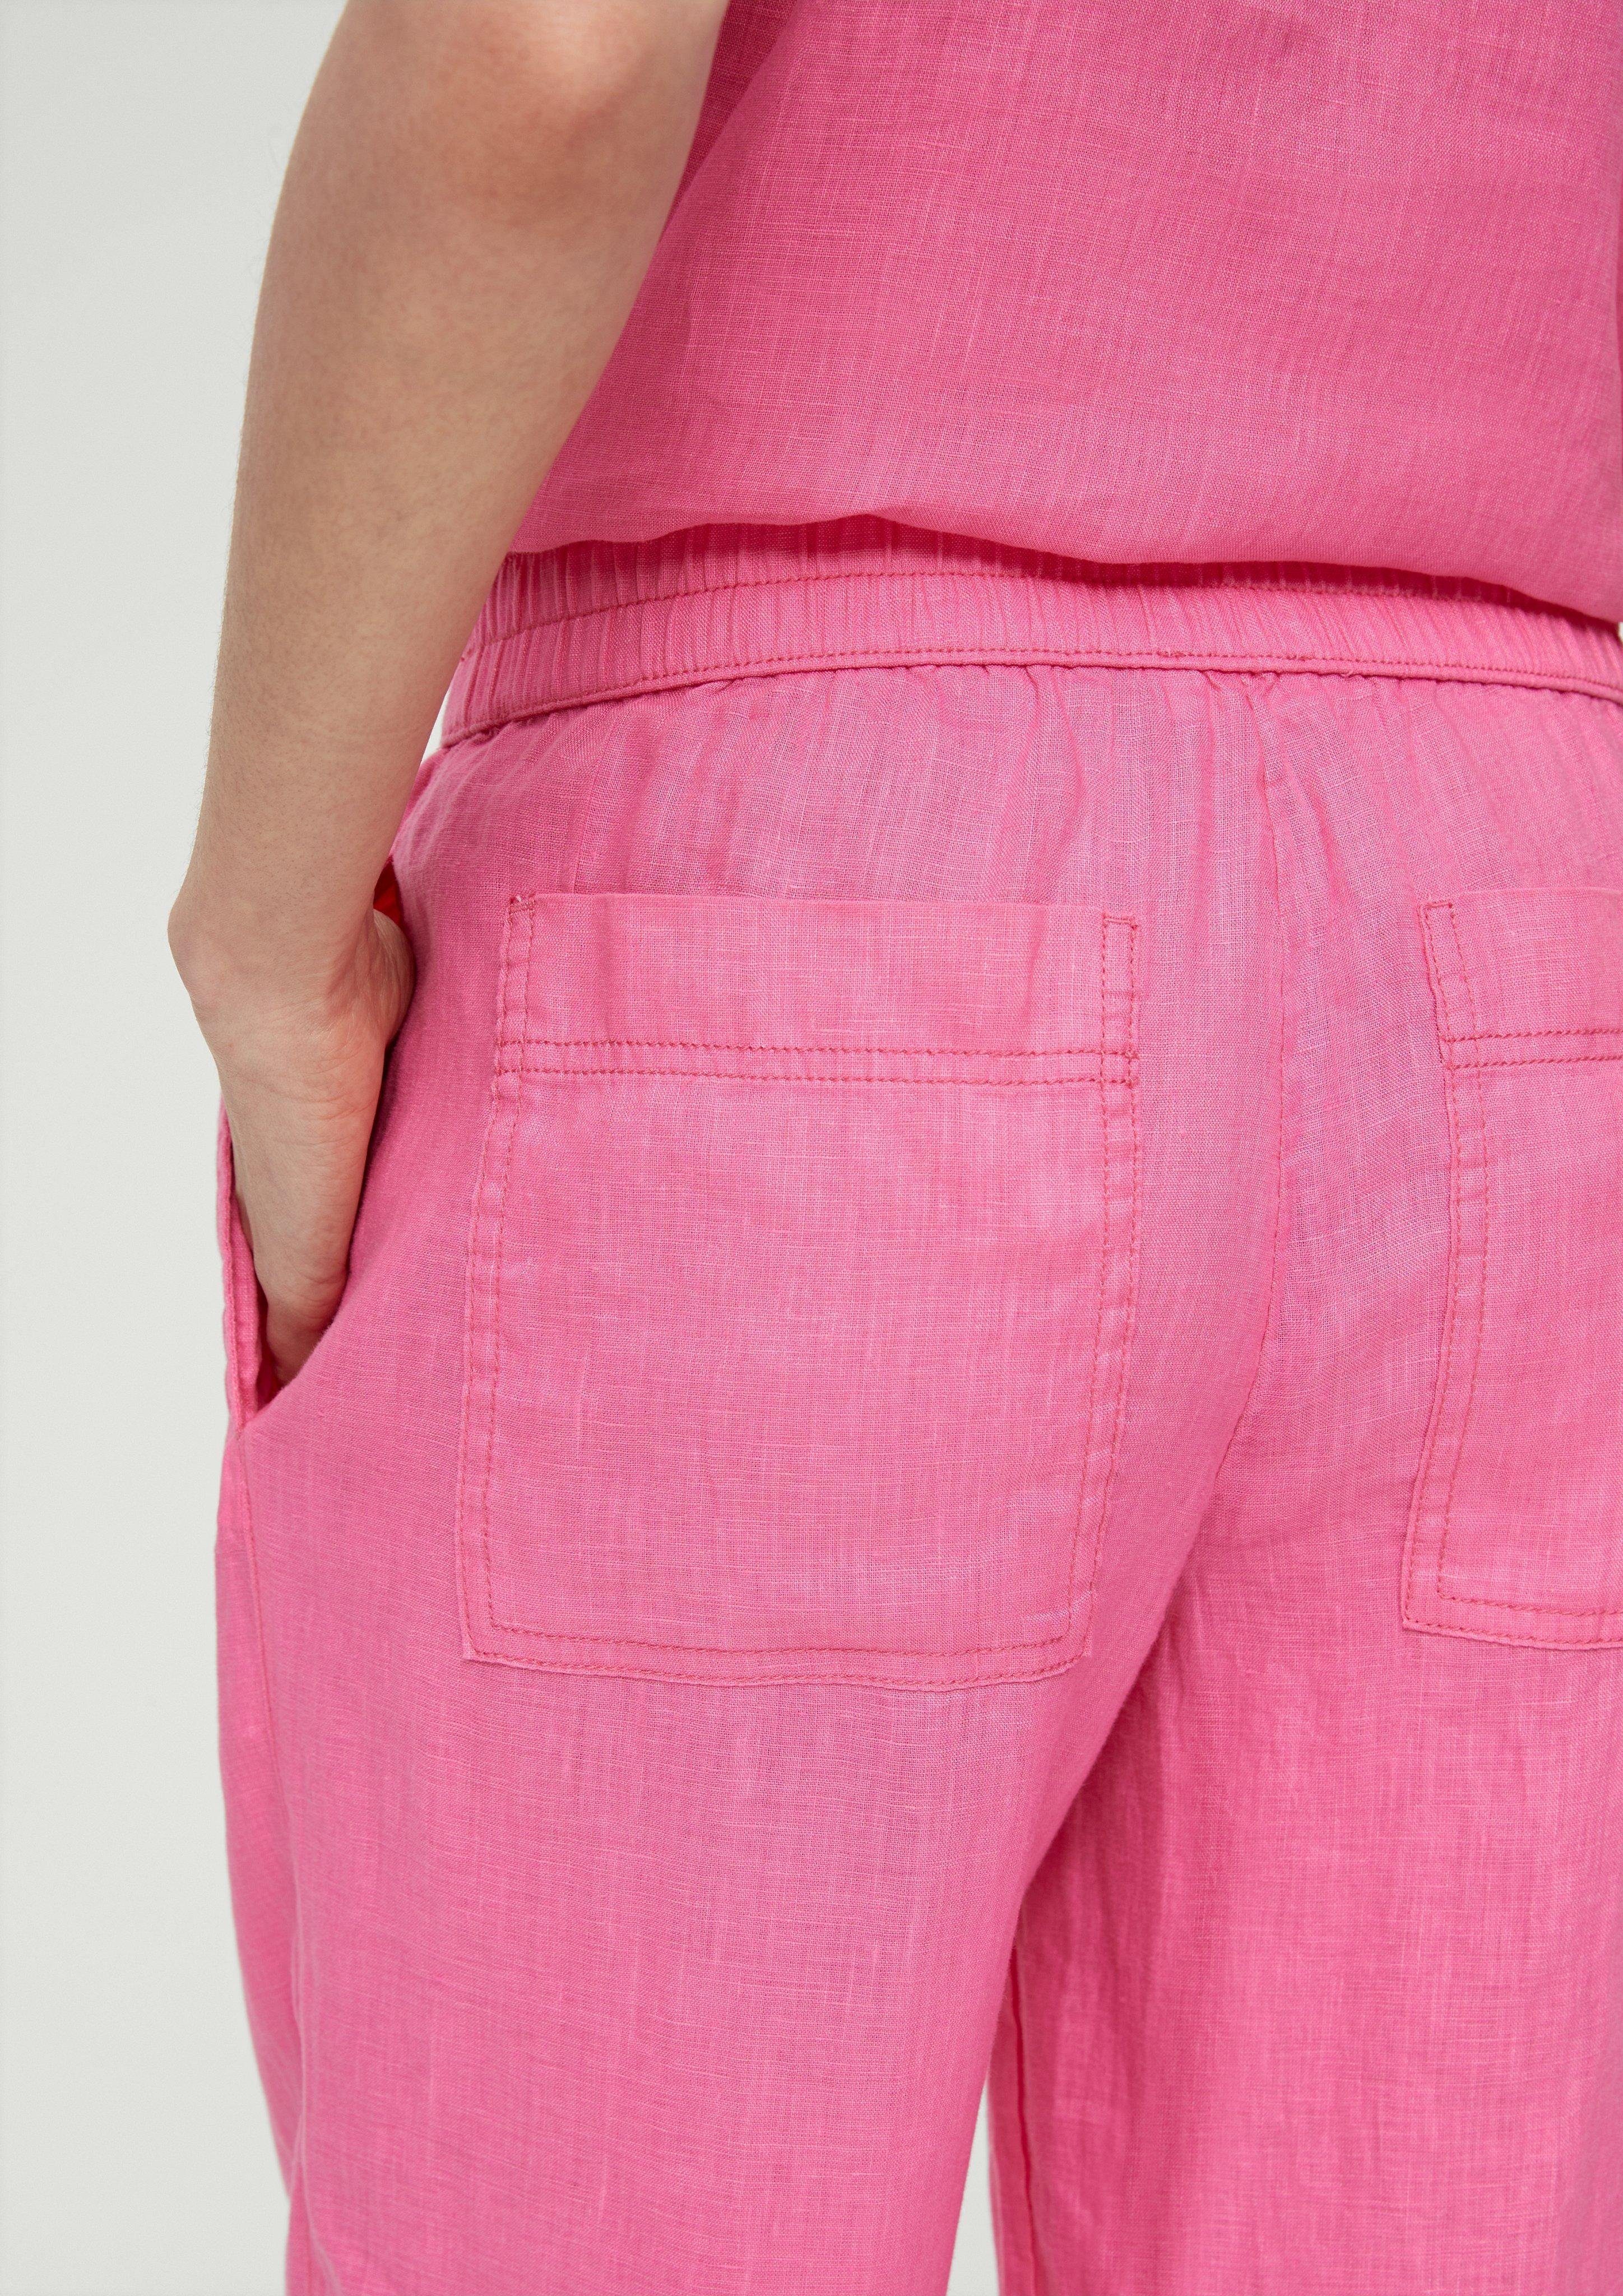 3/4-Hose mit pink Relaxed: Allover-Print s.Oliver Hose